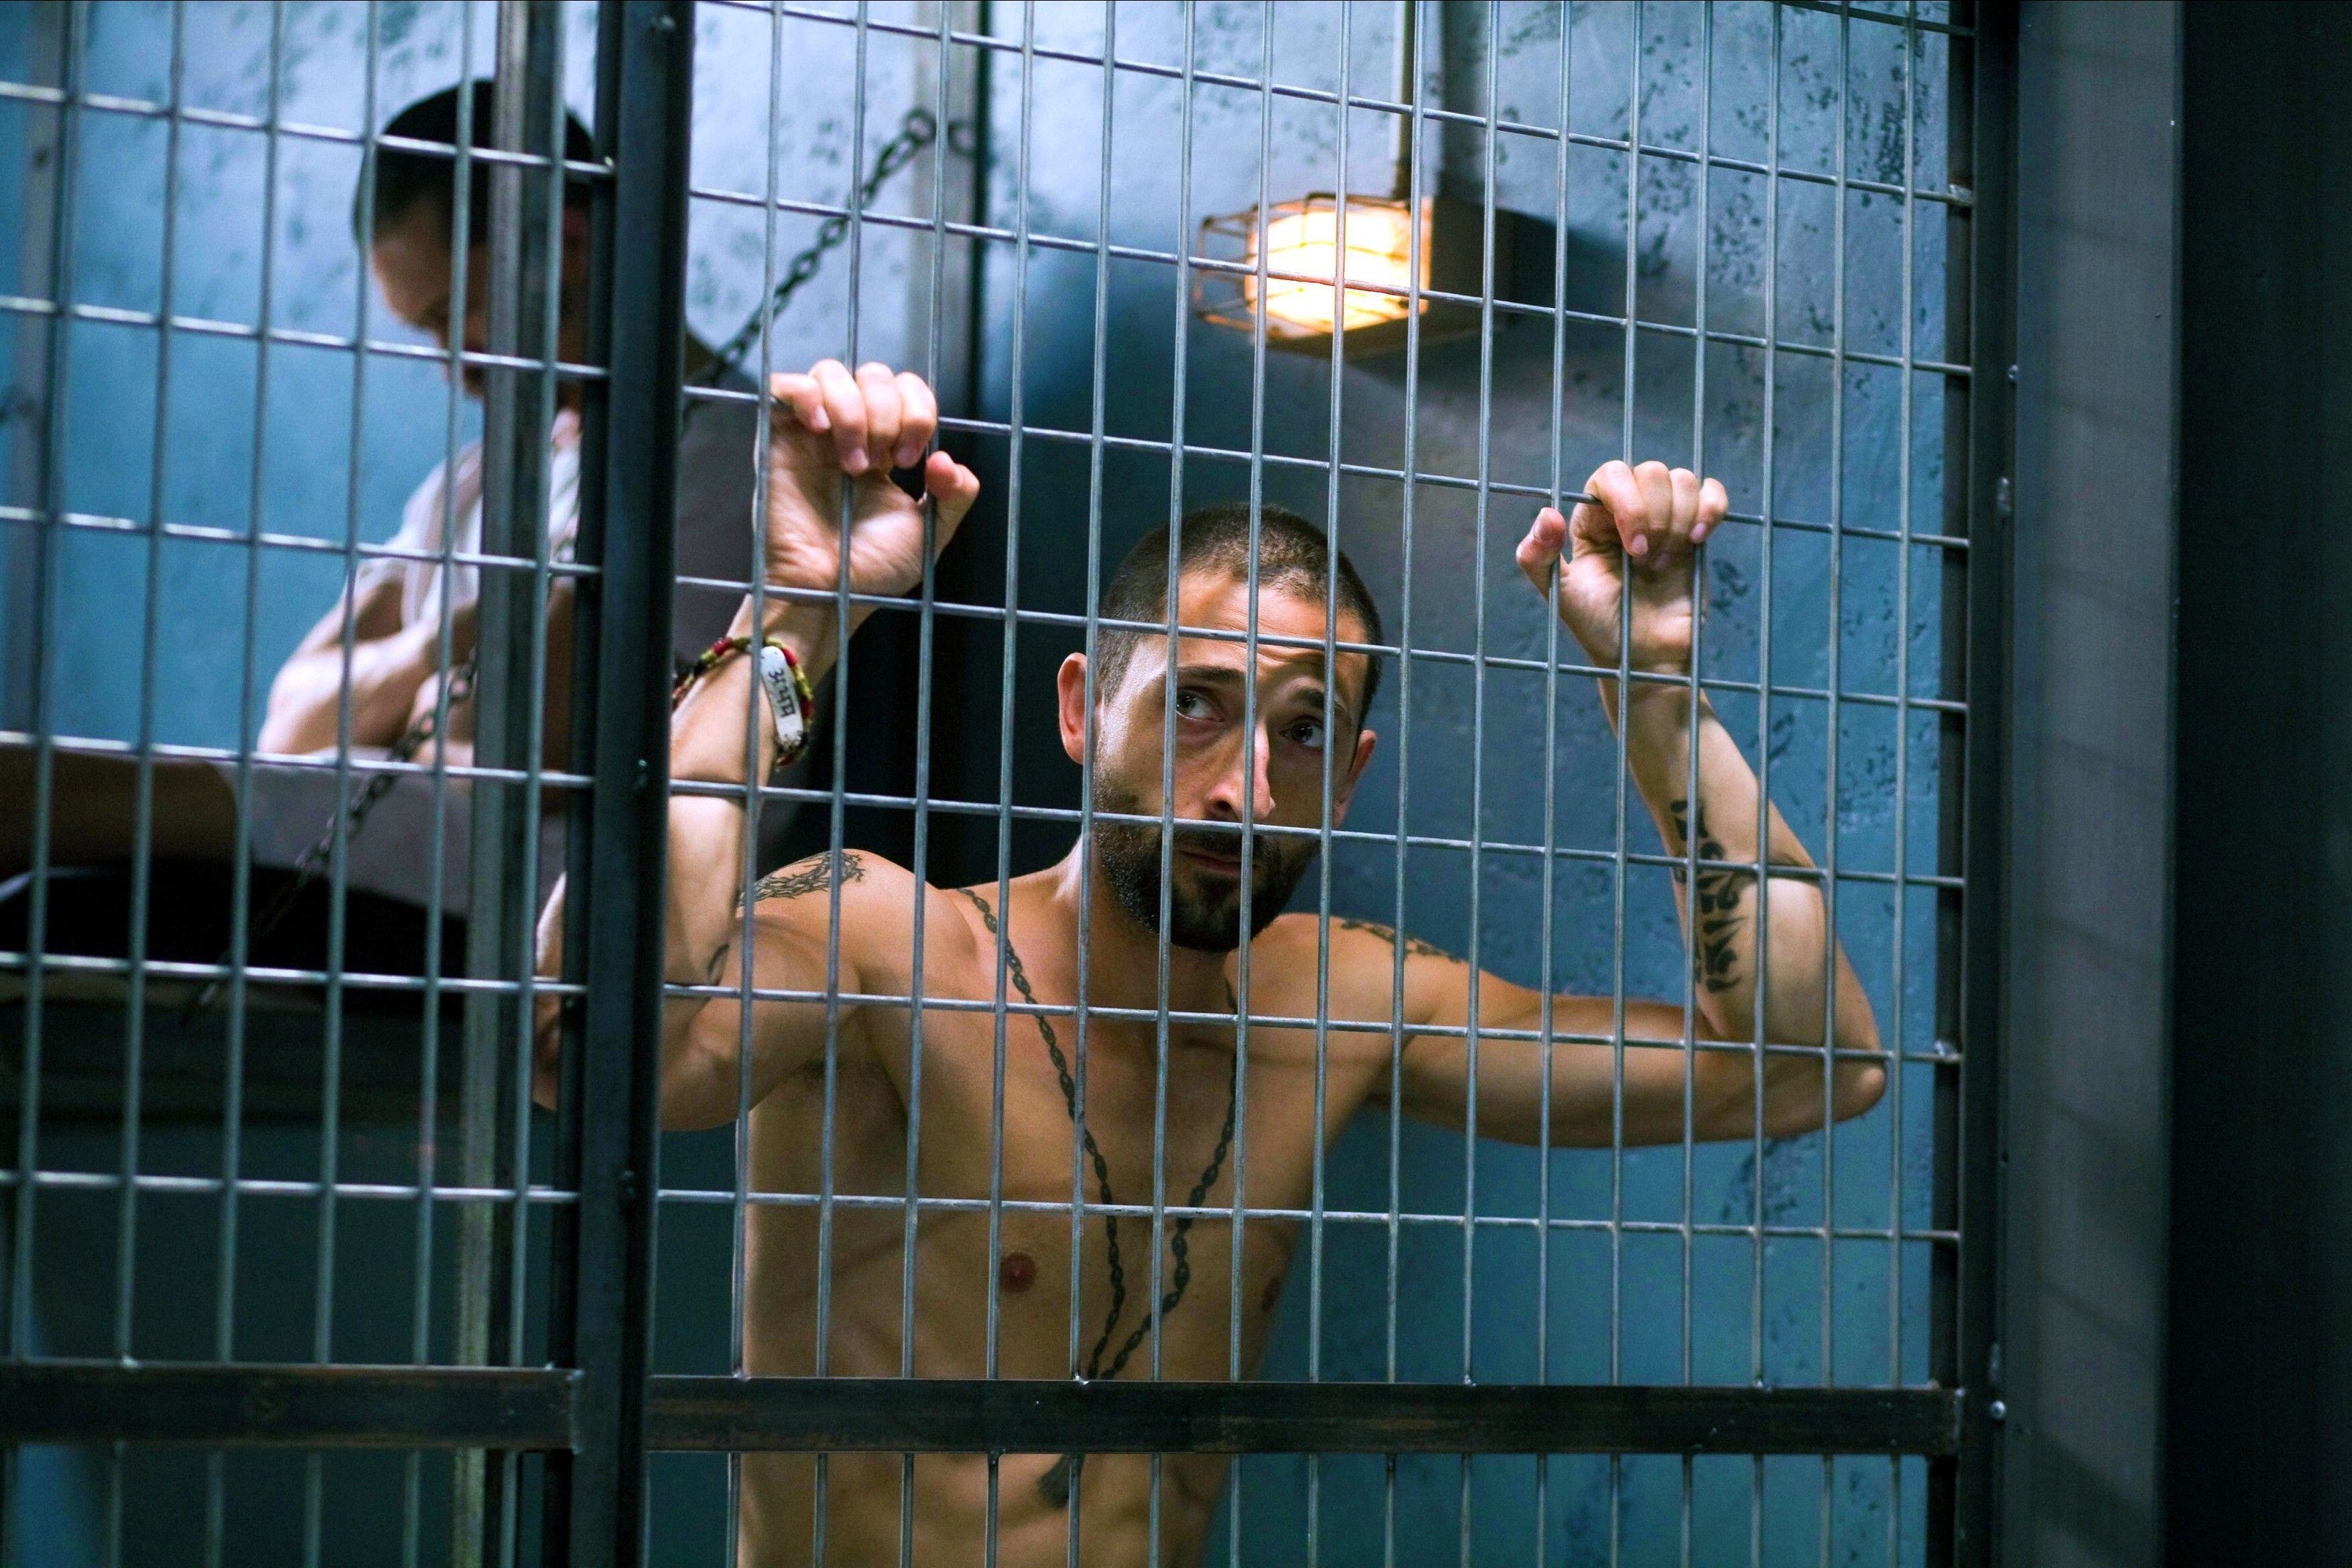 A gaunt man stands inside of a makeshift prison cell